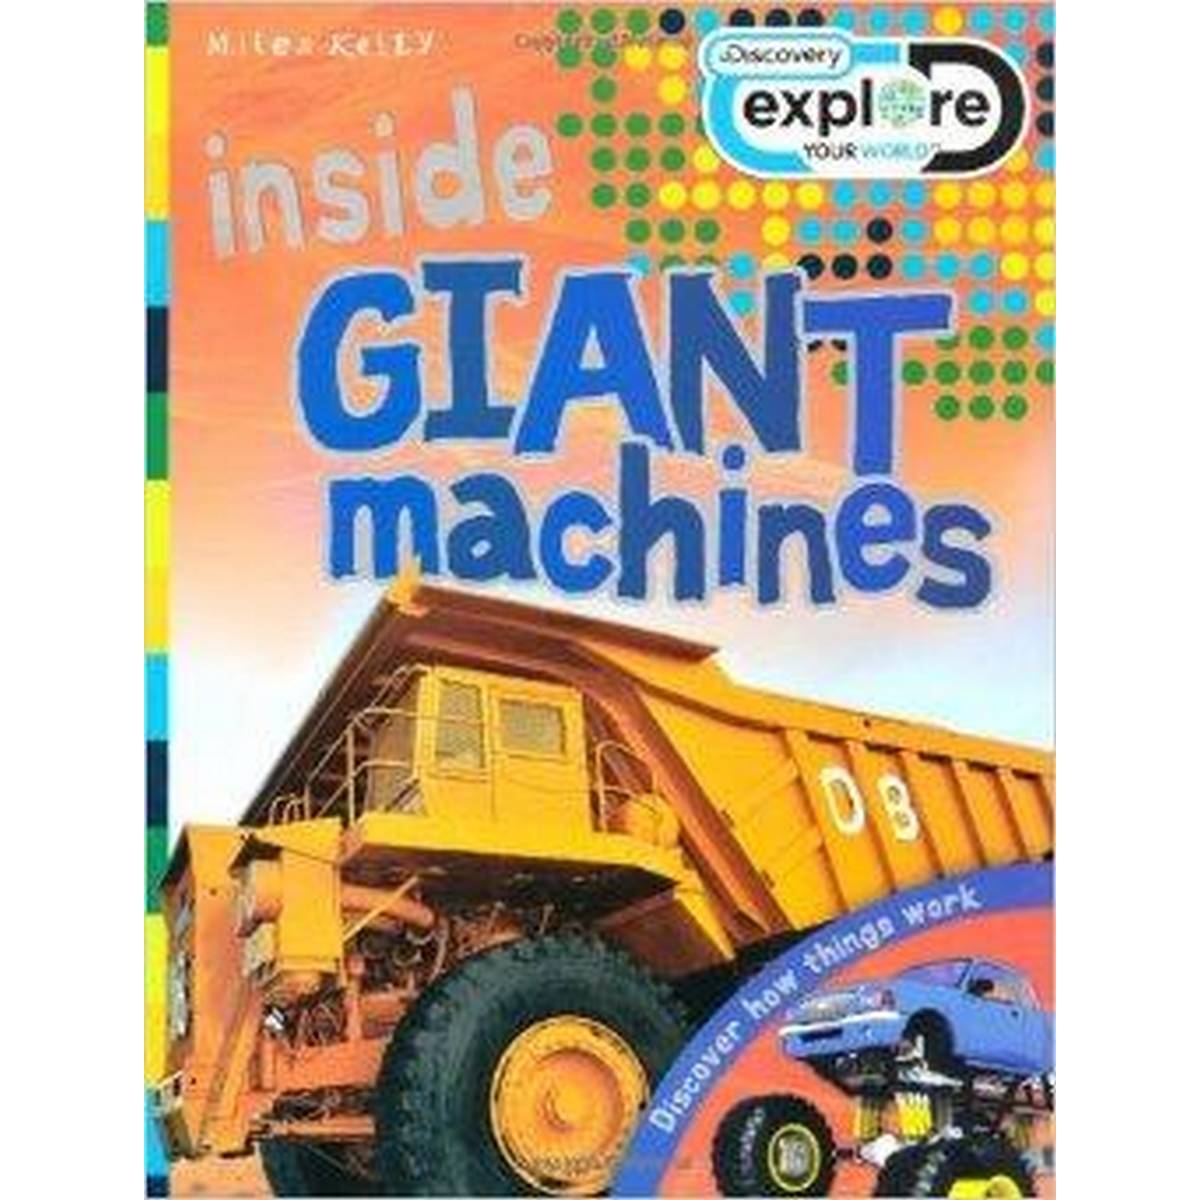 Explore your World Inside Giant Machines